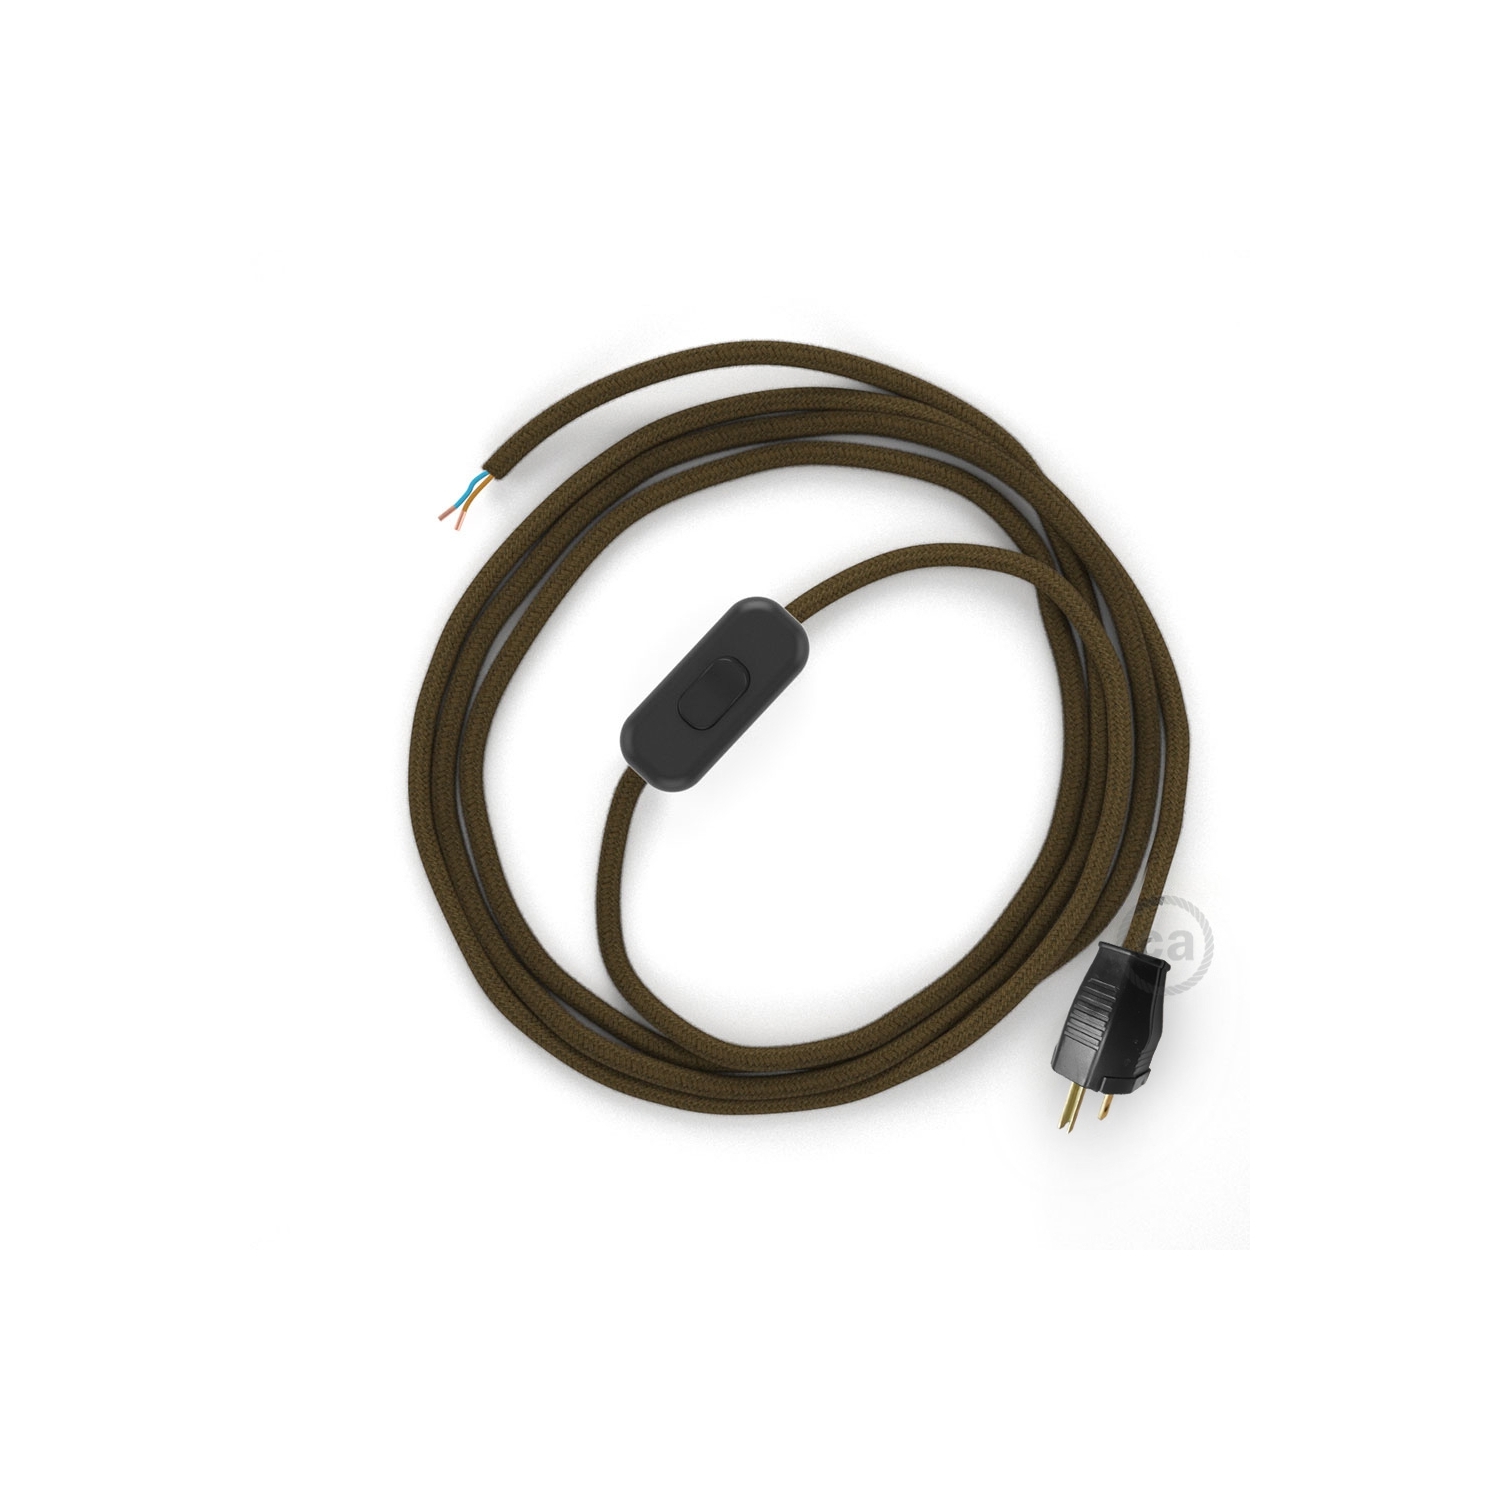 Power Cord with in-line switch, RC13 Brown Cotton - Choose color of switch/plug